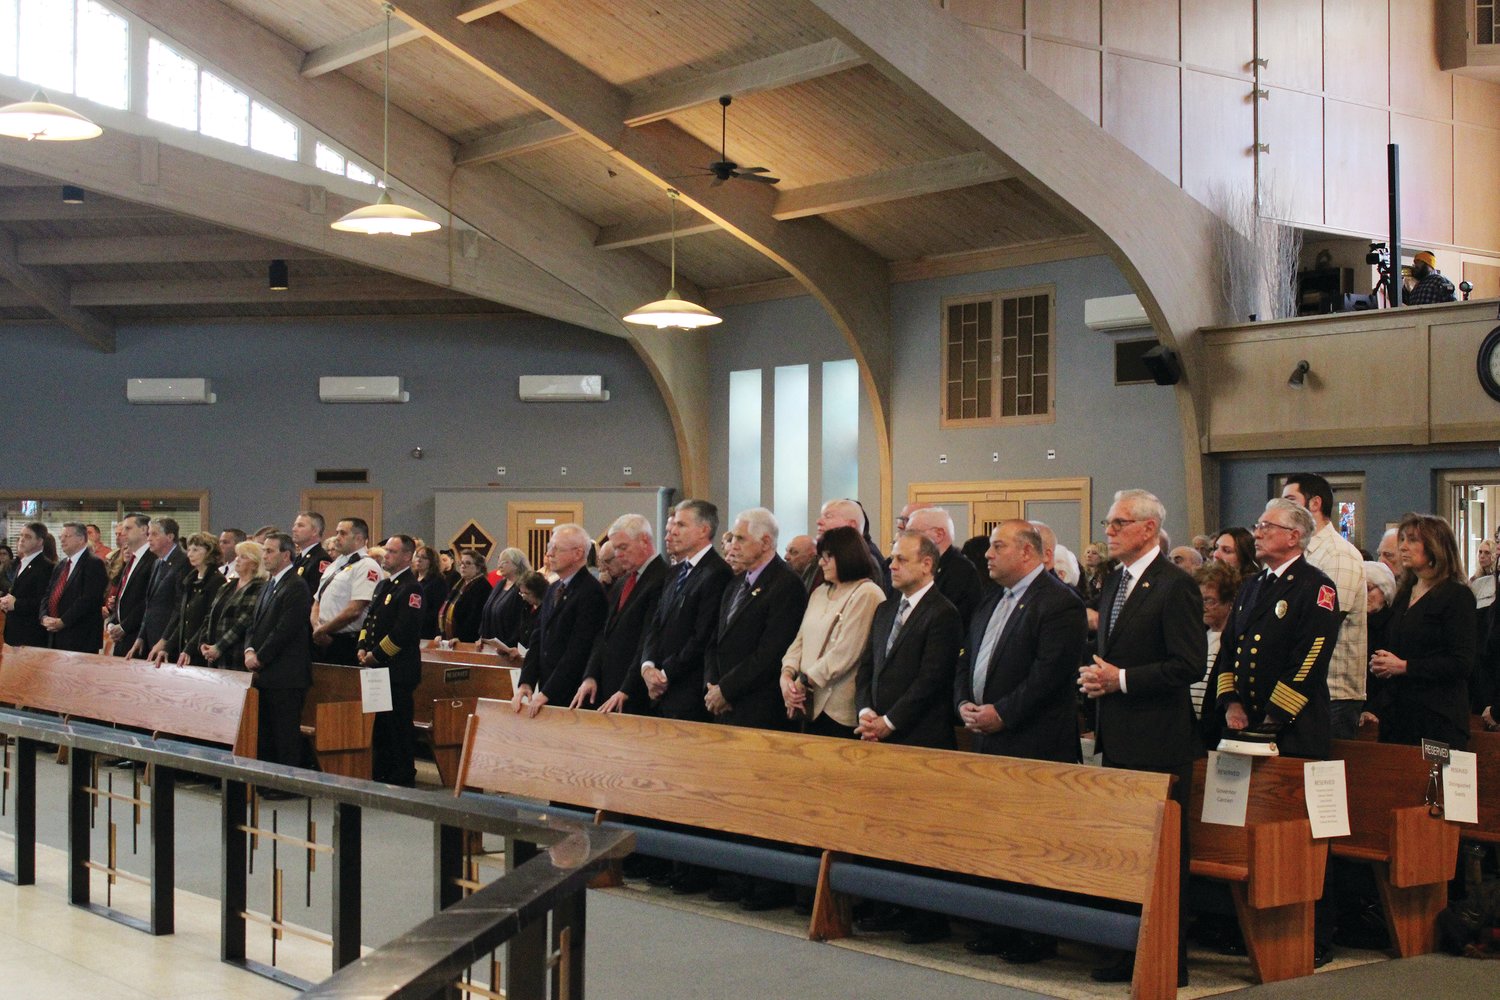 Many state and local officials, including first responders, survivors and loved ones of those who lost their lives in the 2023 Station Nightclub Fire attend a Memorial Mass at St. Kevin Church, Warwick marking the 20th anniversary of the tragic event.